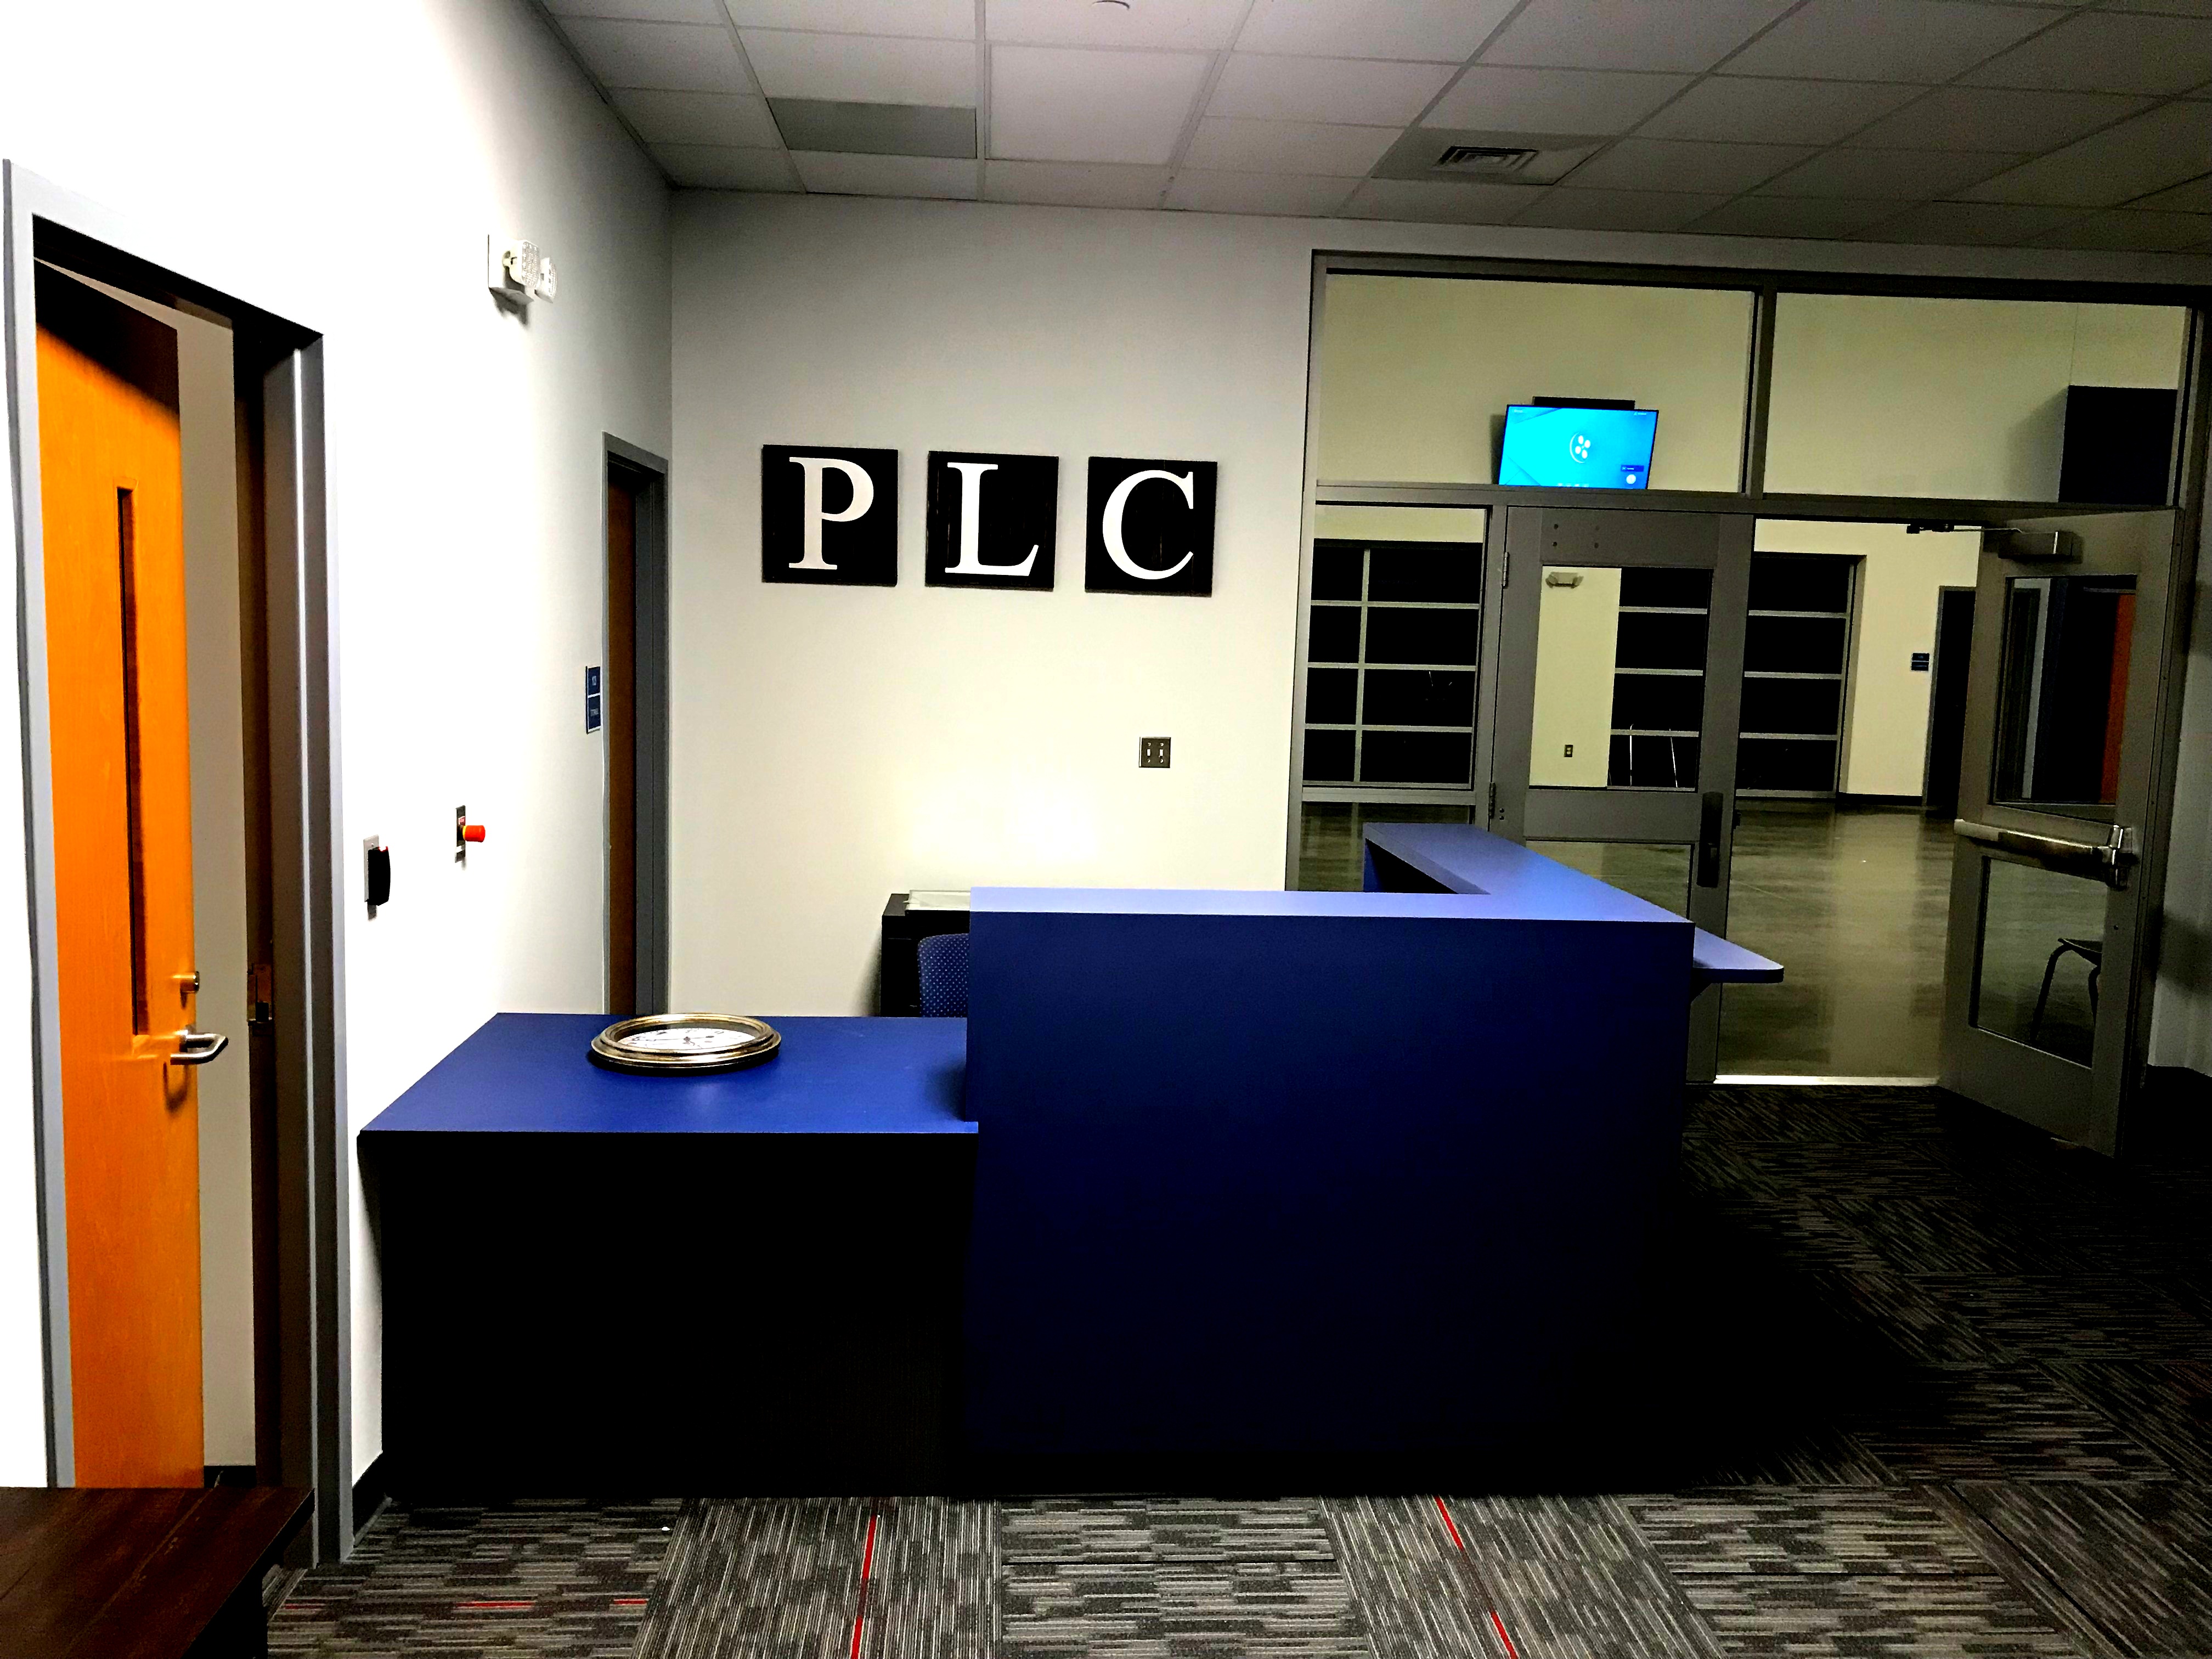 Reception area of the Performance Learning Center